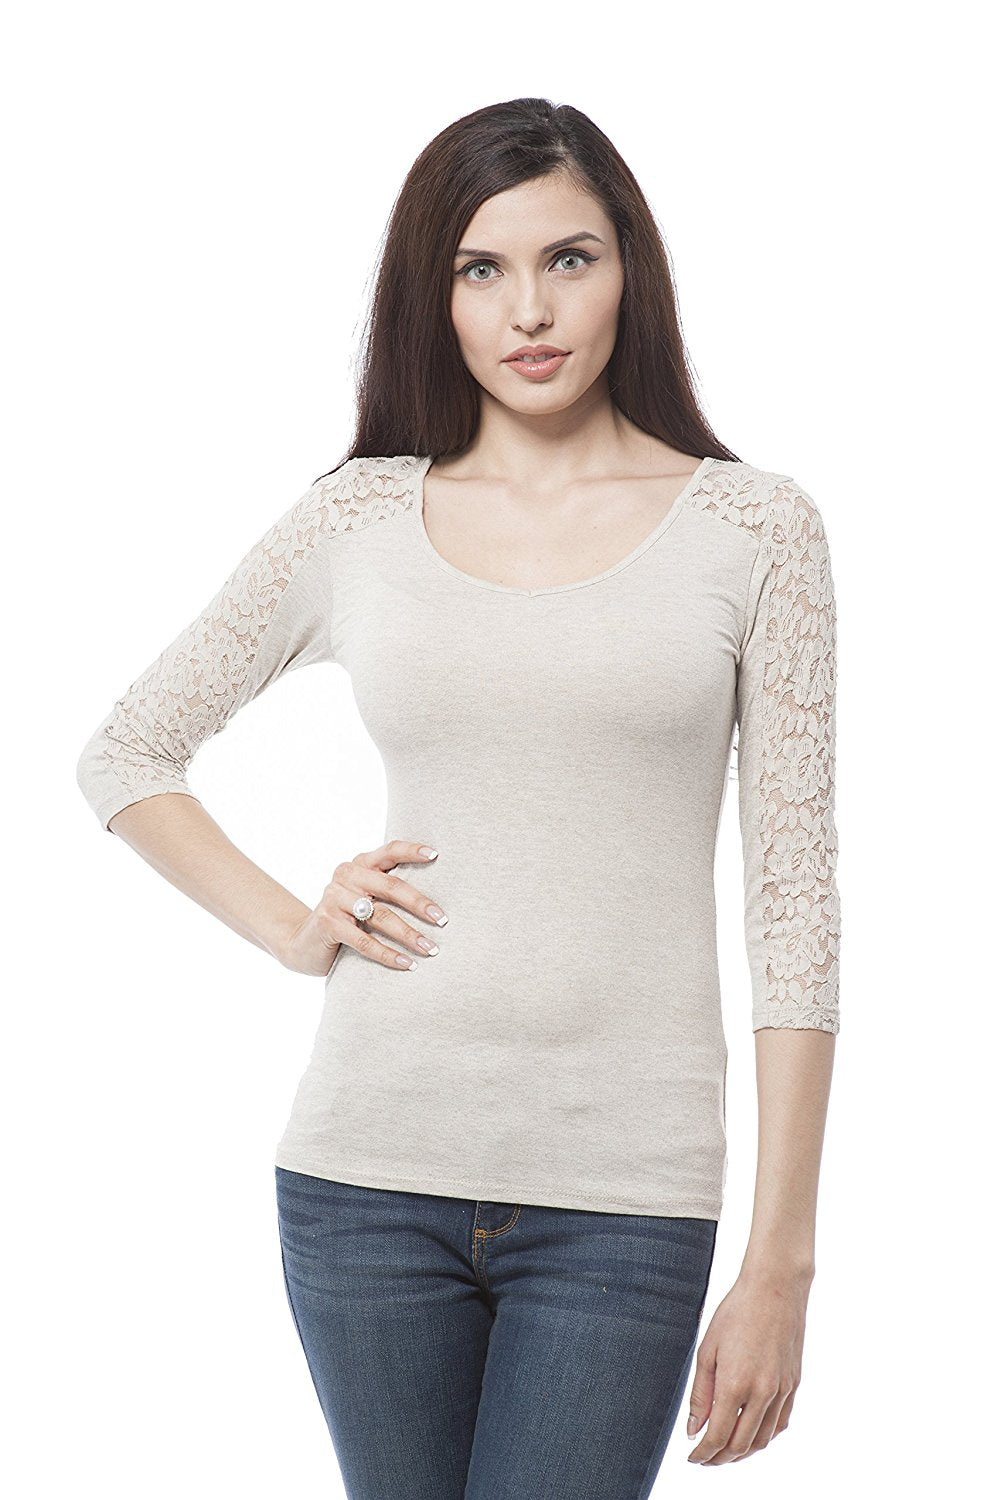 Hollywood Star Fashion Crepe Span Top With Lace Contrast On Sleeve